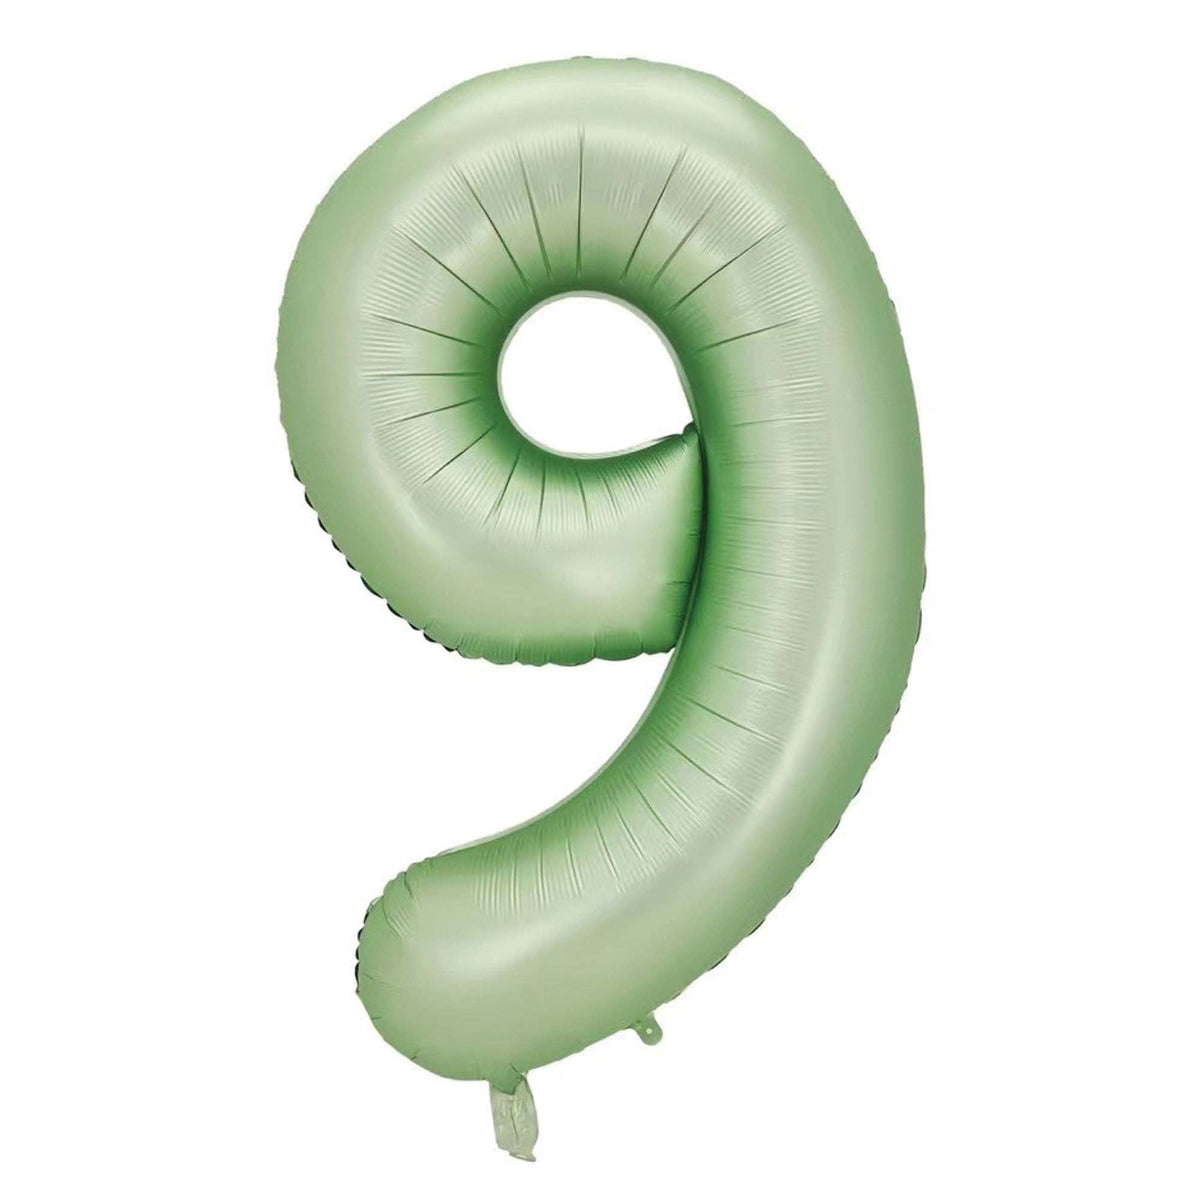 BOOMBA INTERNATIONAL TRADING CO,. LTD Balloons Eucalyptus Matte Green Number 9 Supershape Foil Balloon, 40 Inches, 1 Count 810077659939